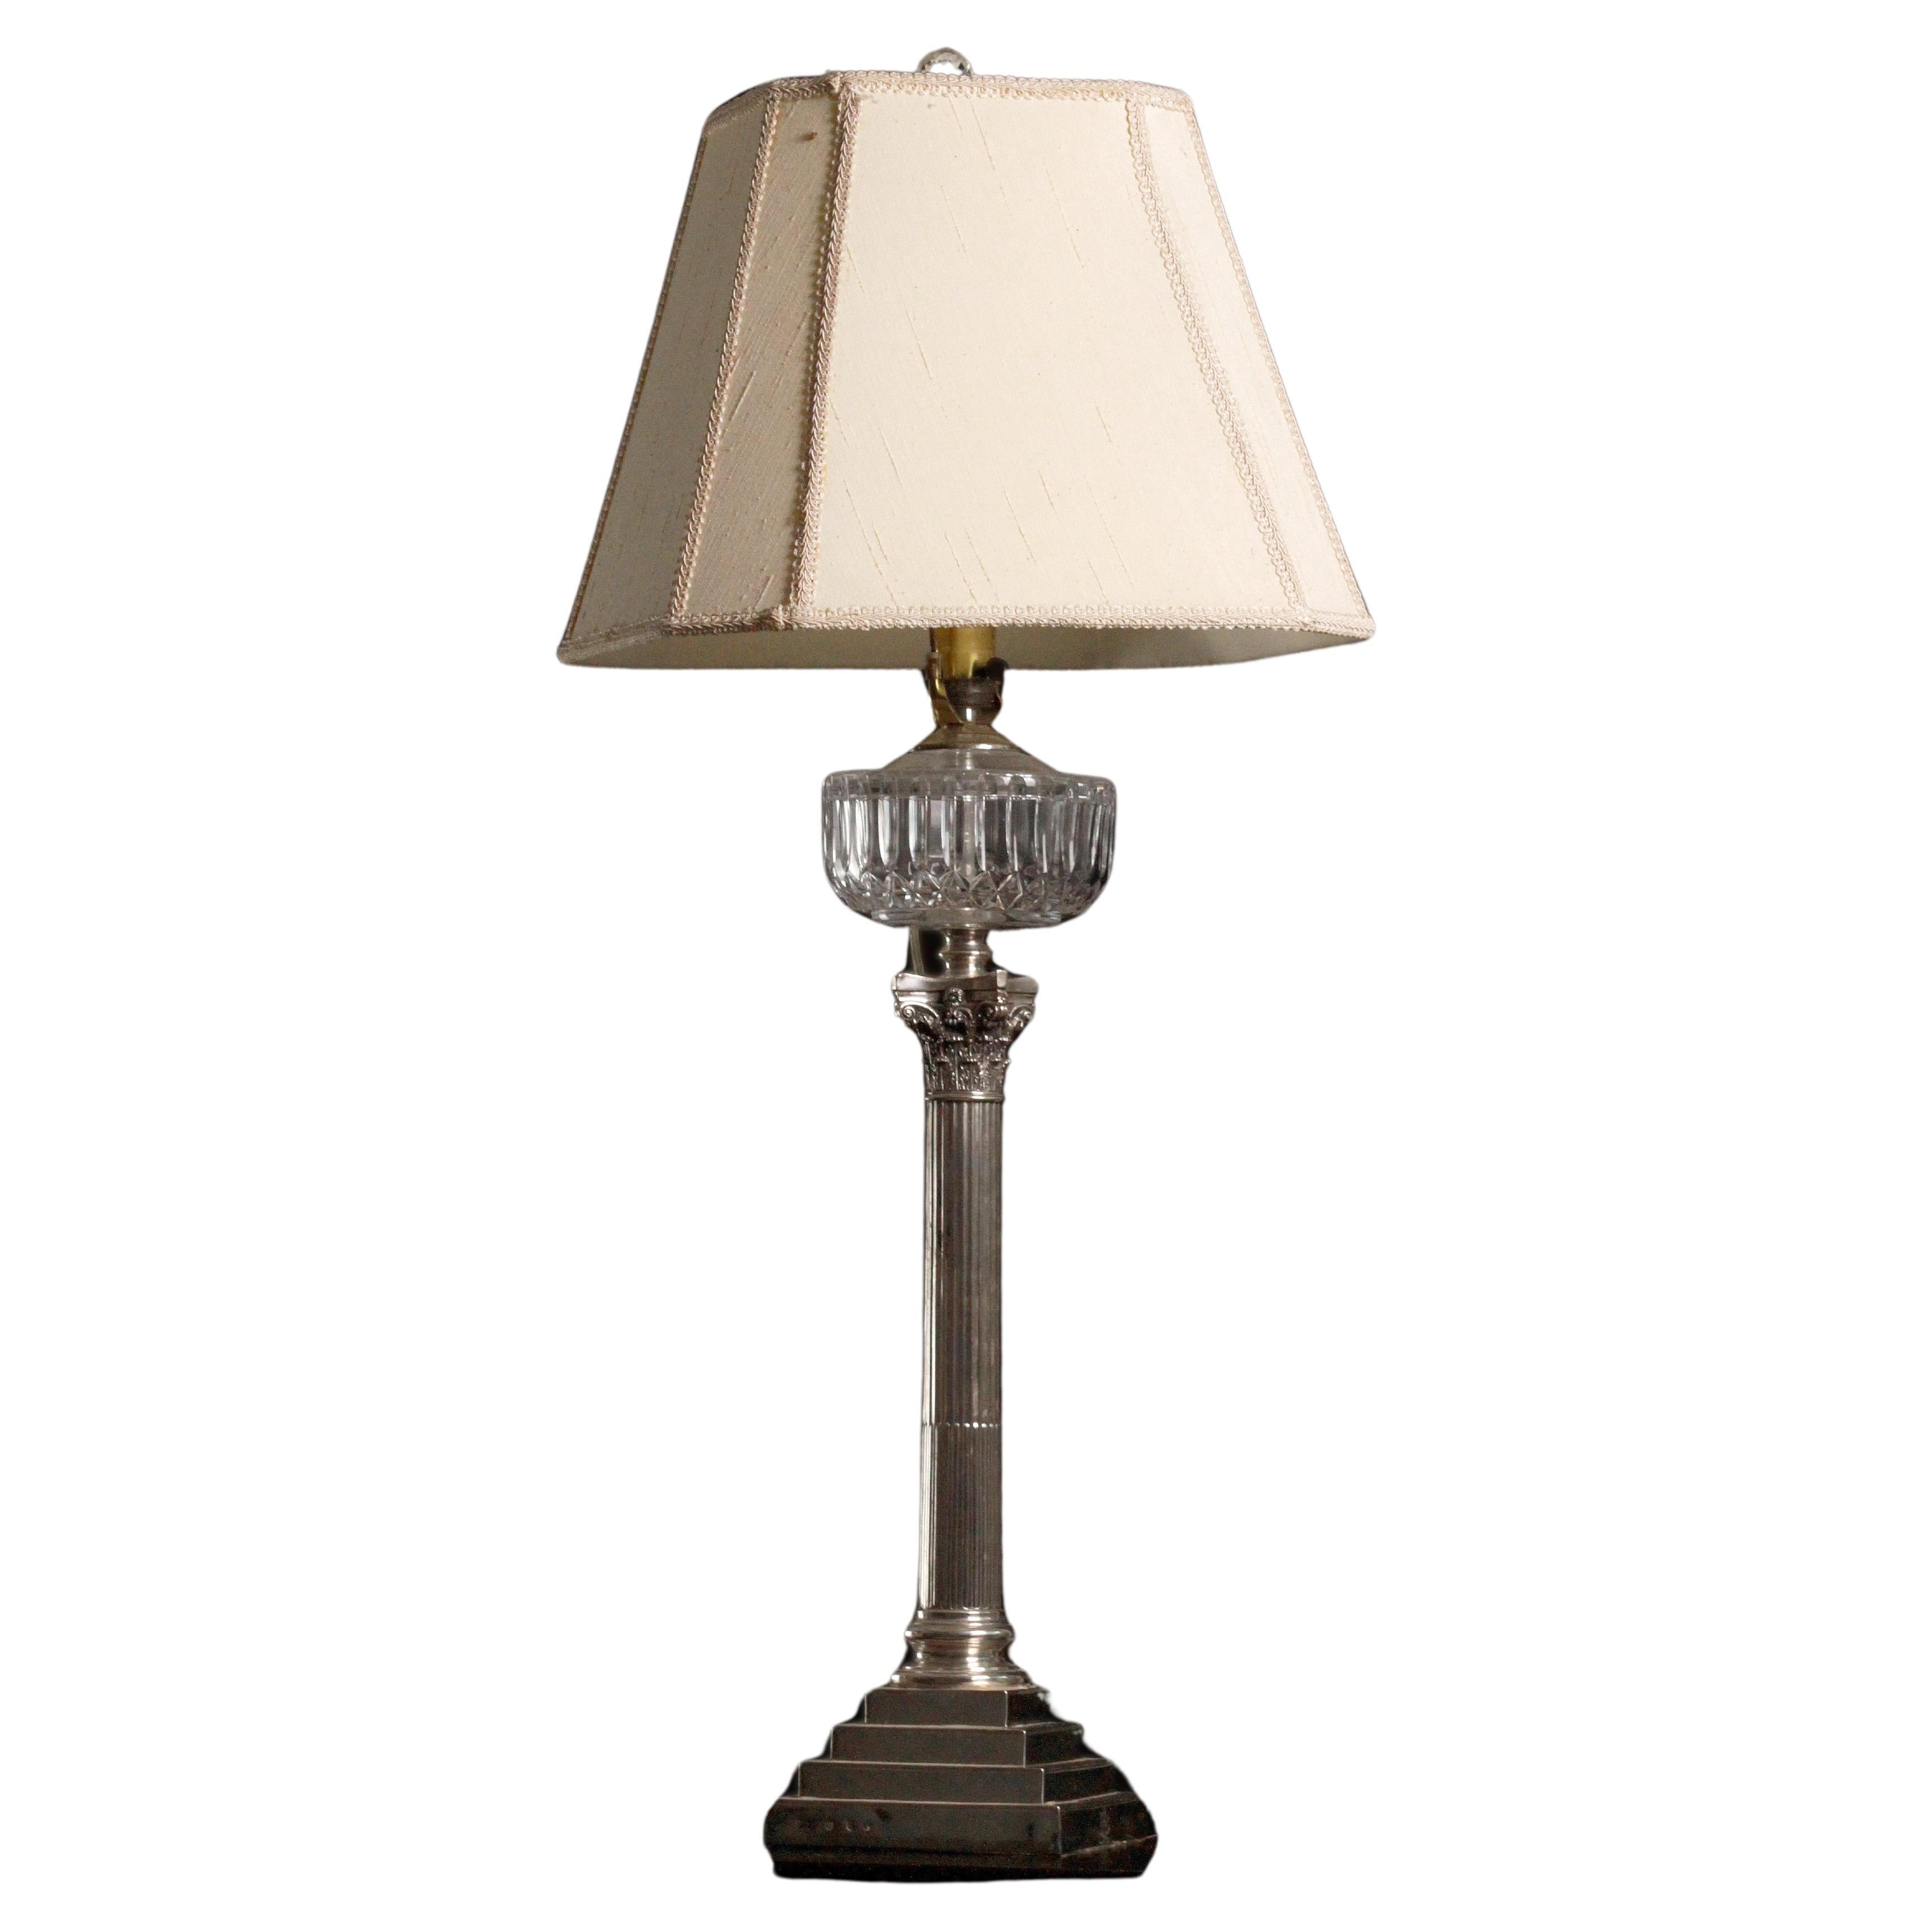 Early 20th Century Sterling Silver Table Lamp by Hamilton & Inches, Ltd. For Sale